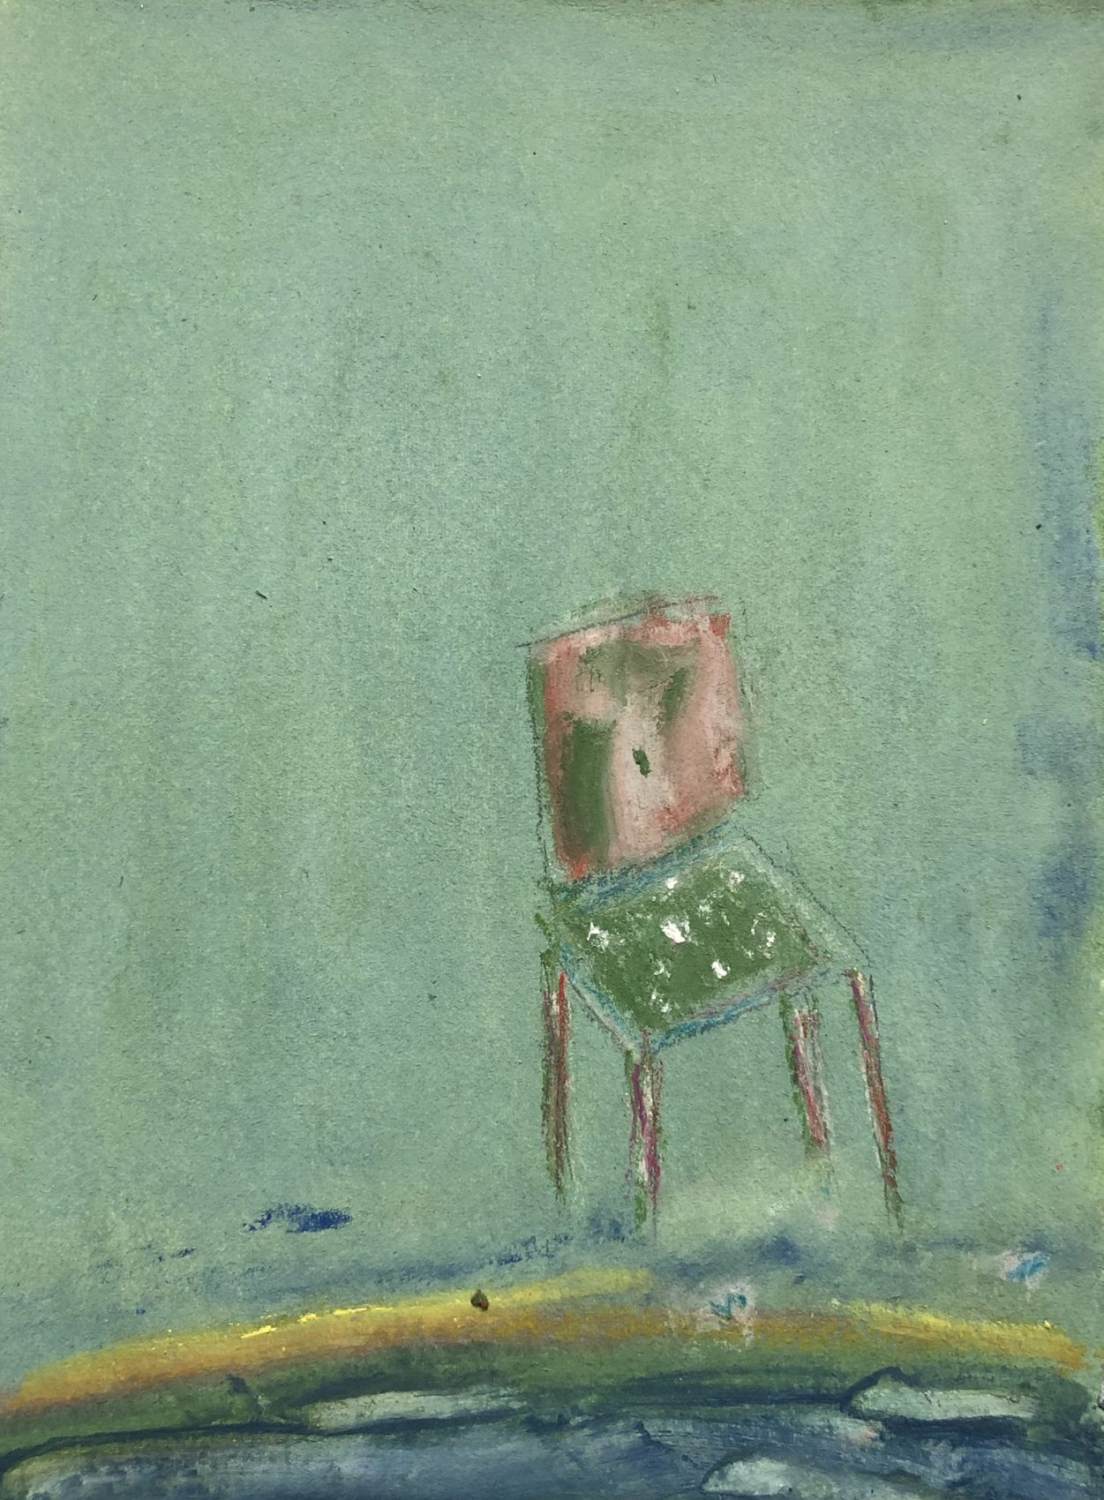 lorraine-weidner-repose-11-still-life-painting-abstract-realism-green-chair-online-gallery